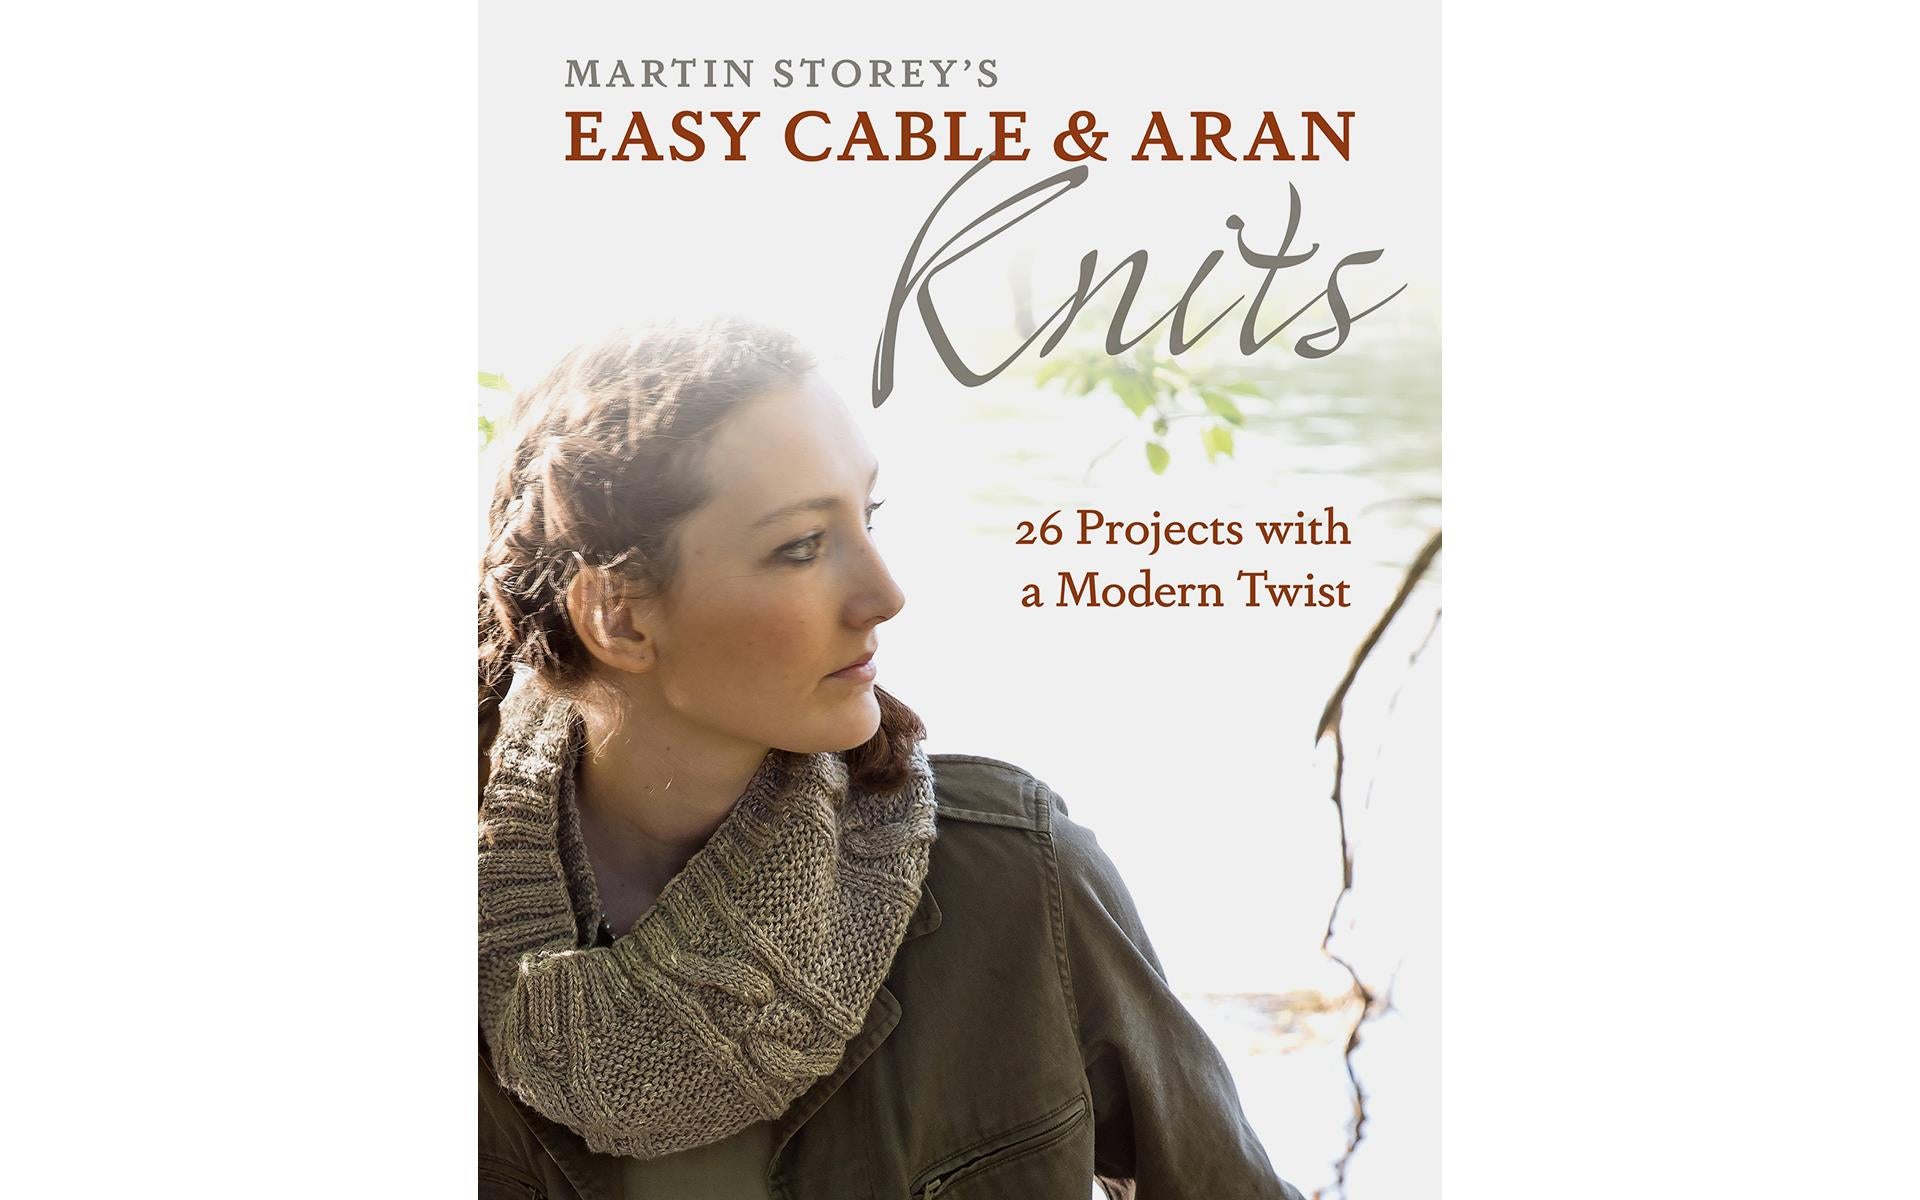 Easy Cable & Aran Knits Book- 26 Projects with a Modern Twist.